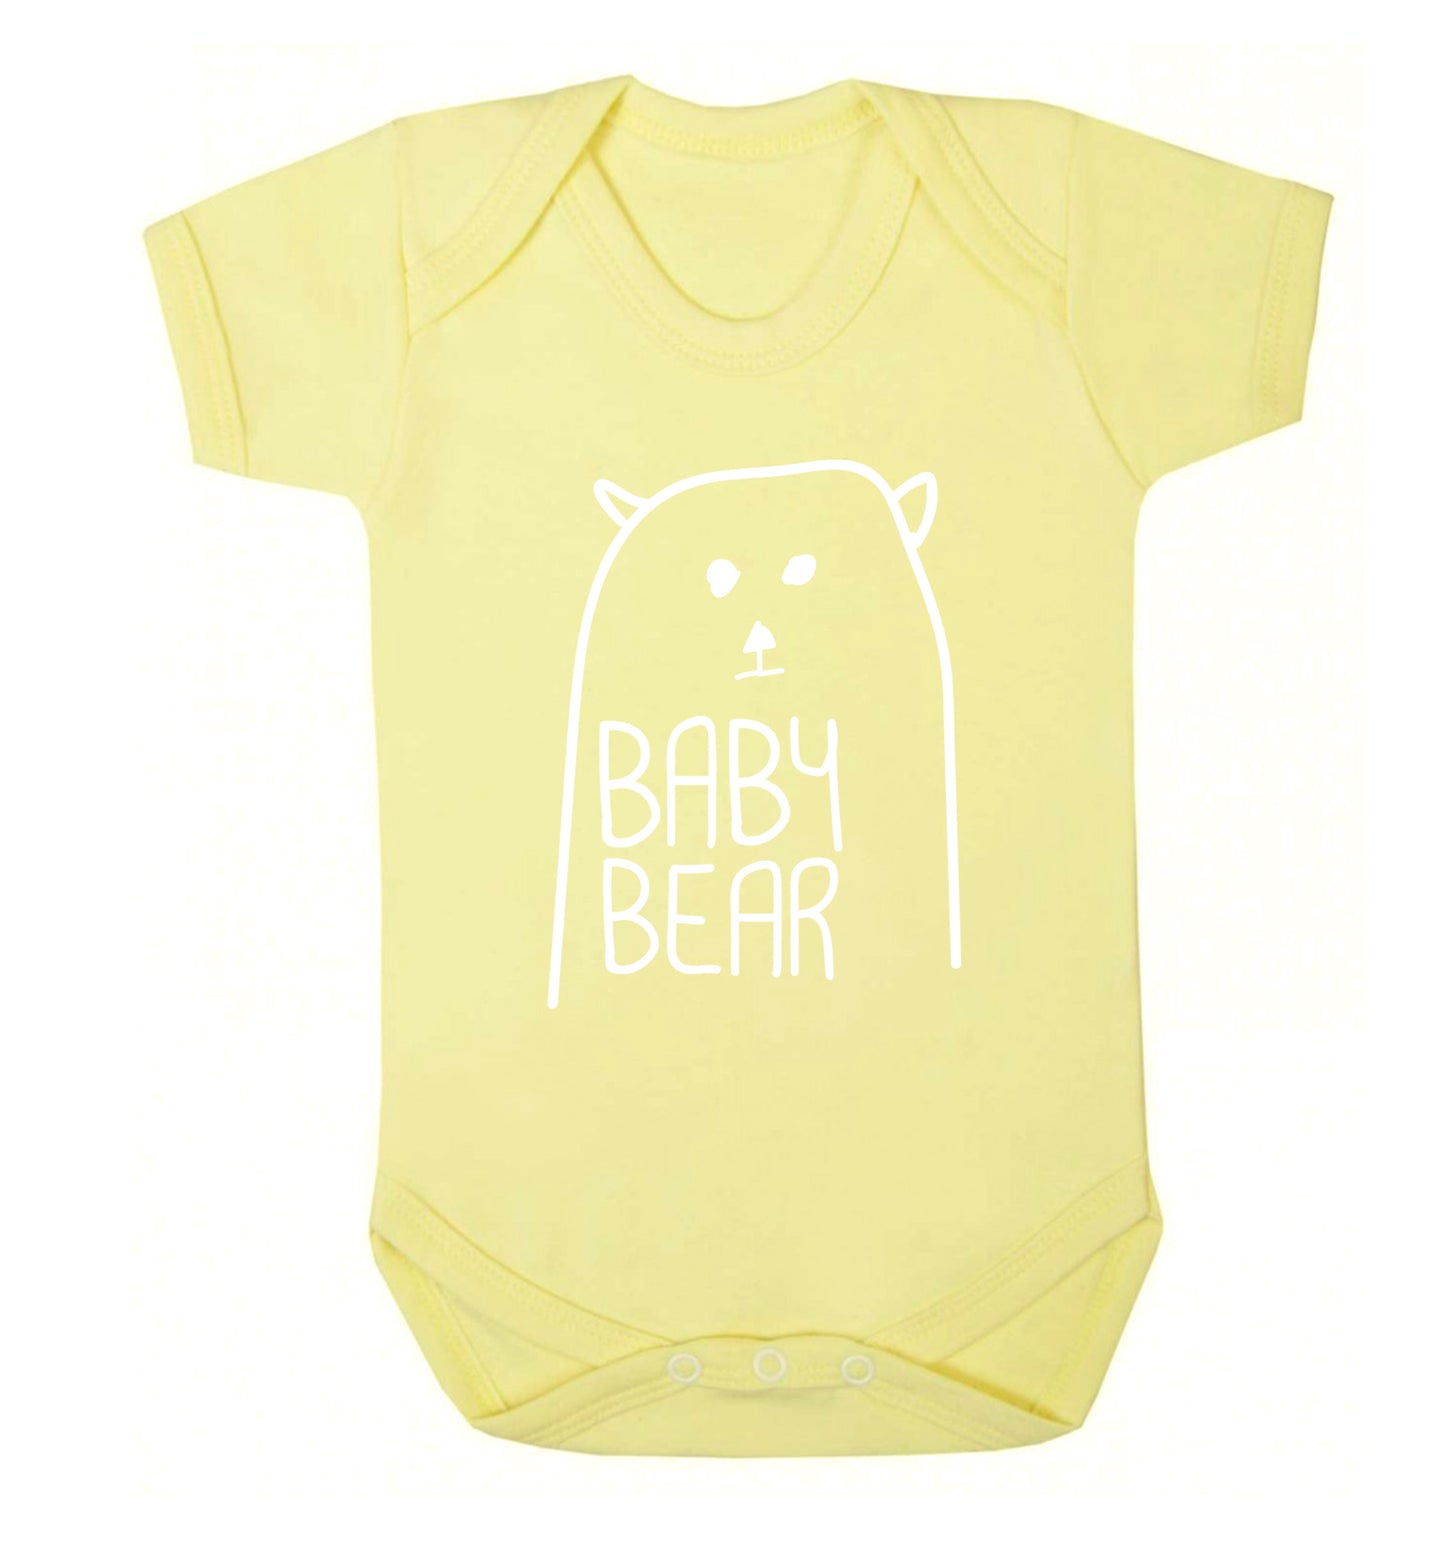 Baby bear Baby Vest pale yellow 18-24 months